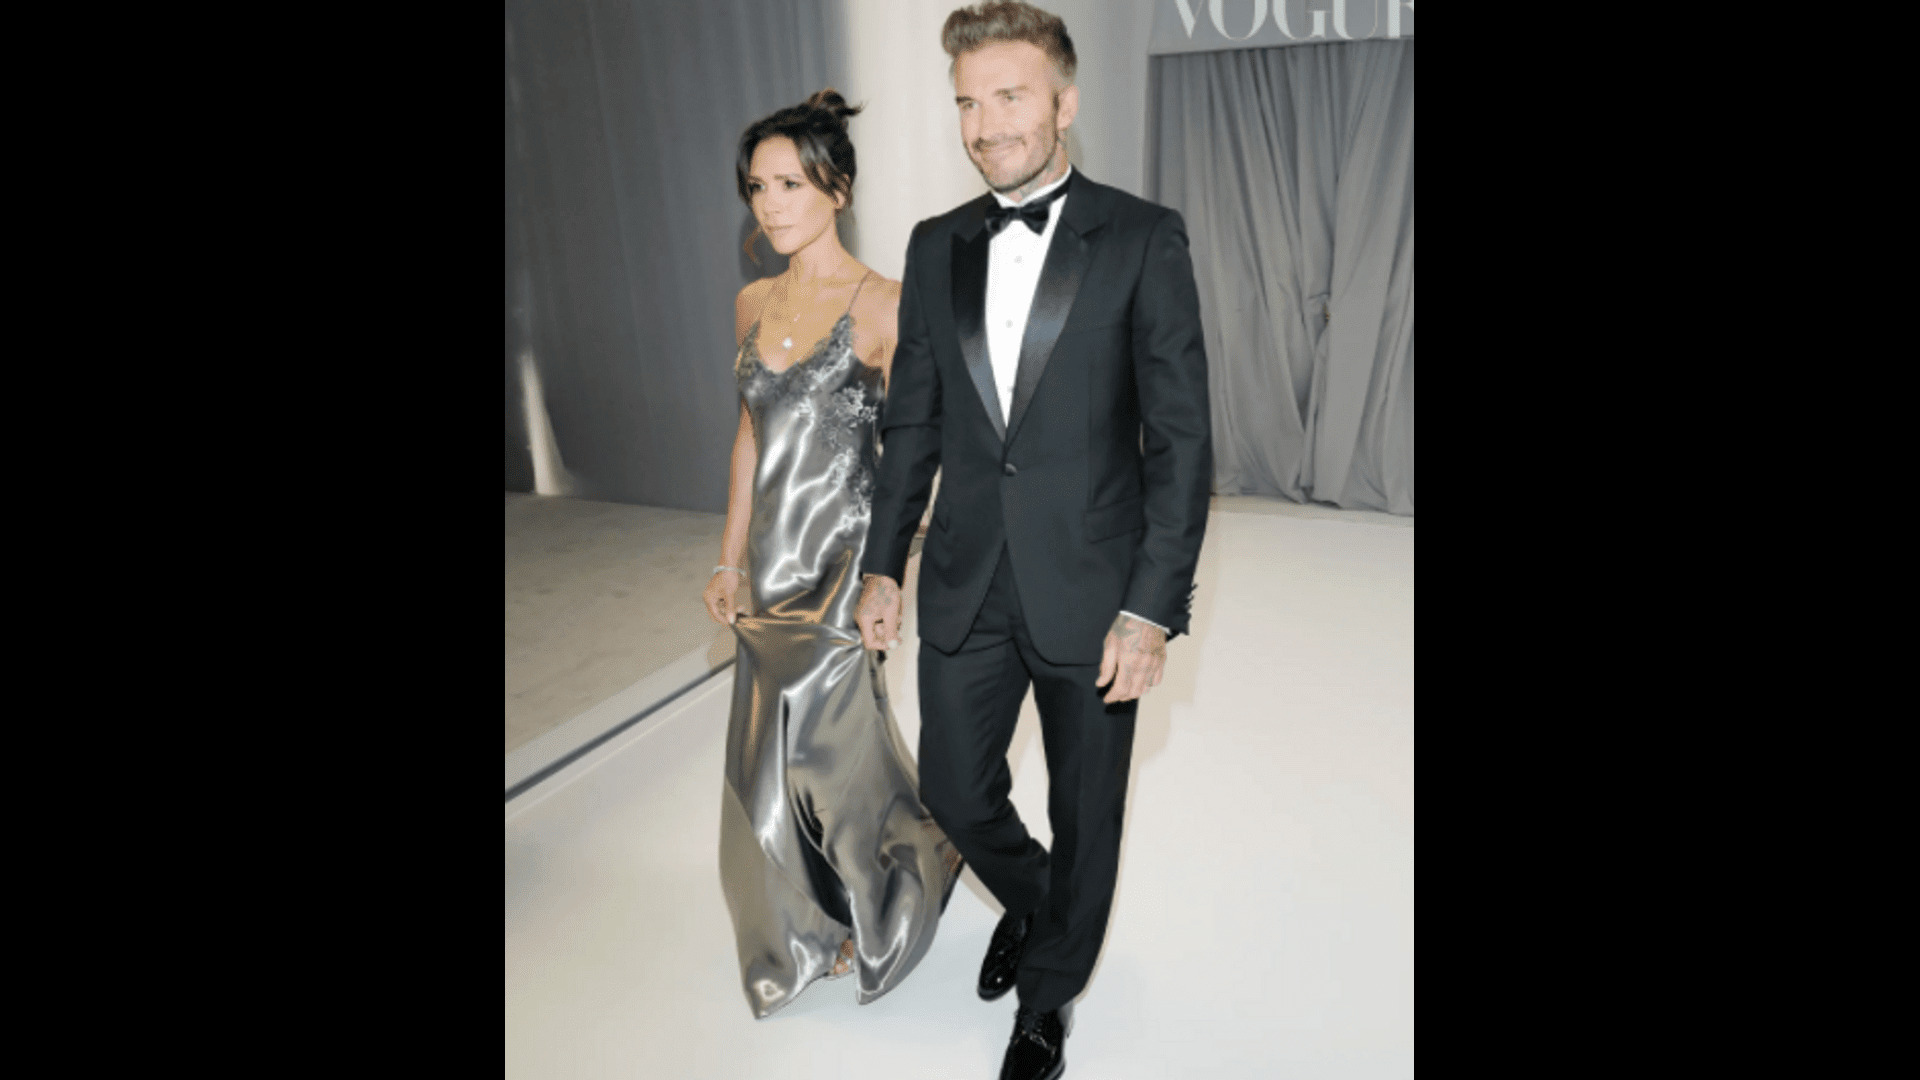 Posh Spice effect: Victoria and David Beckham's couple look at son's wedding